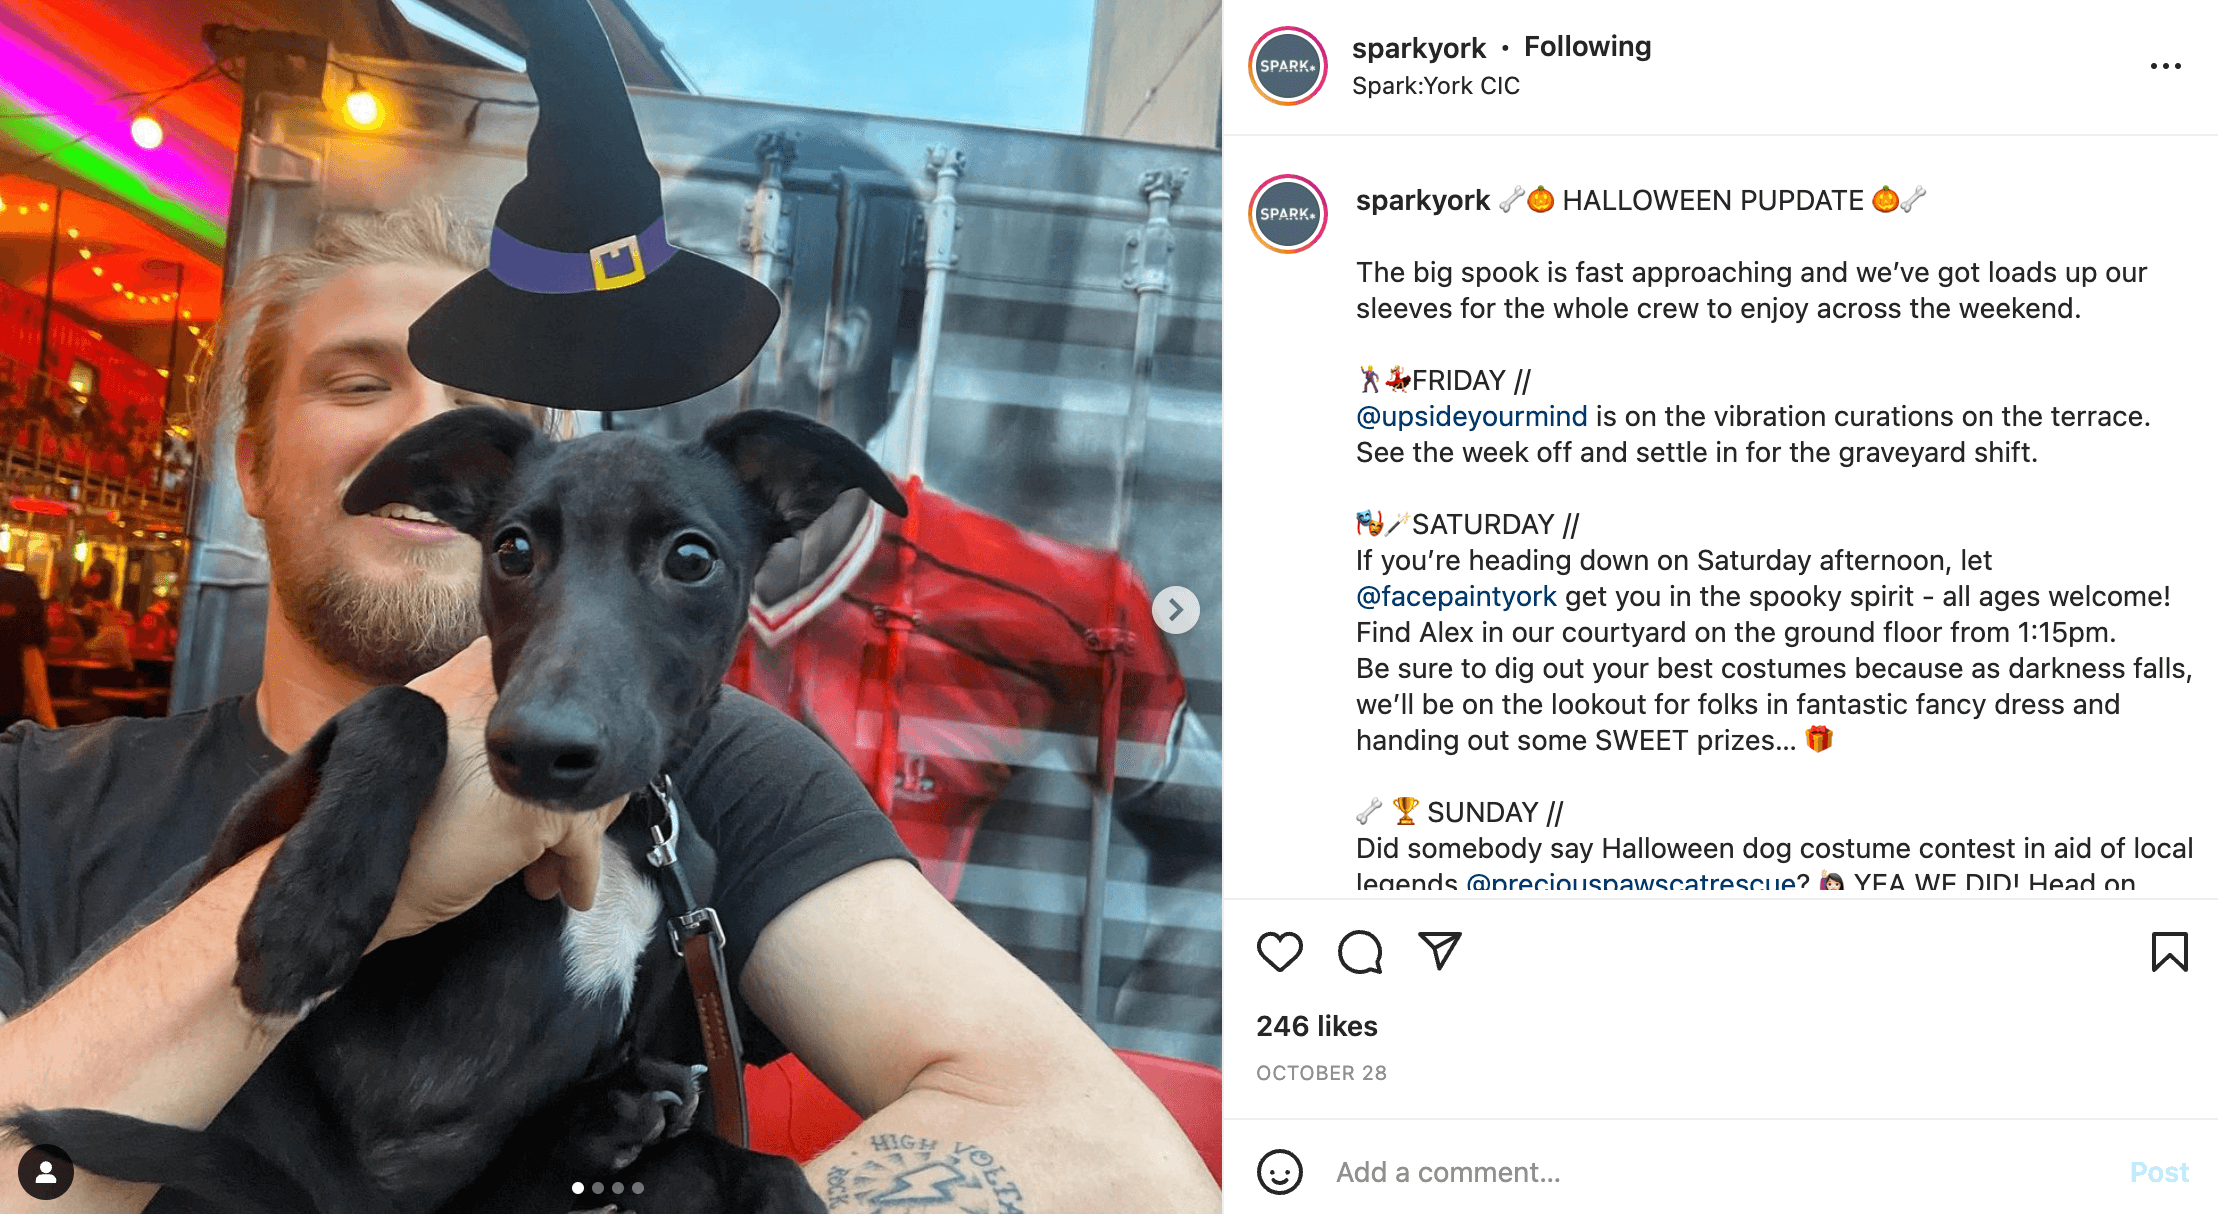 Instagram post of a man holding a black puppy for Halloween